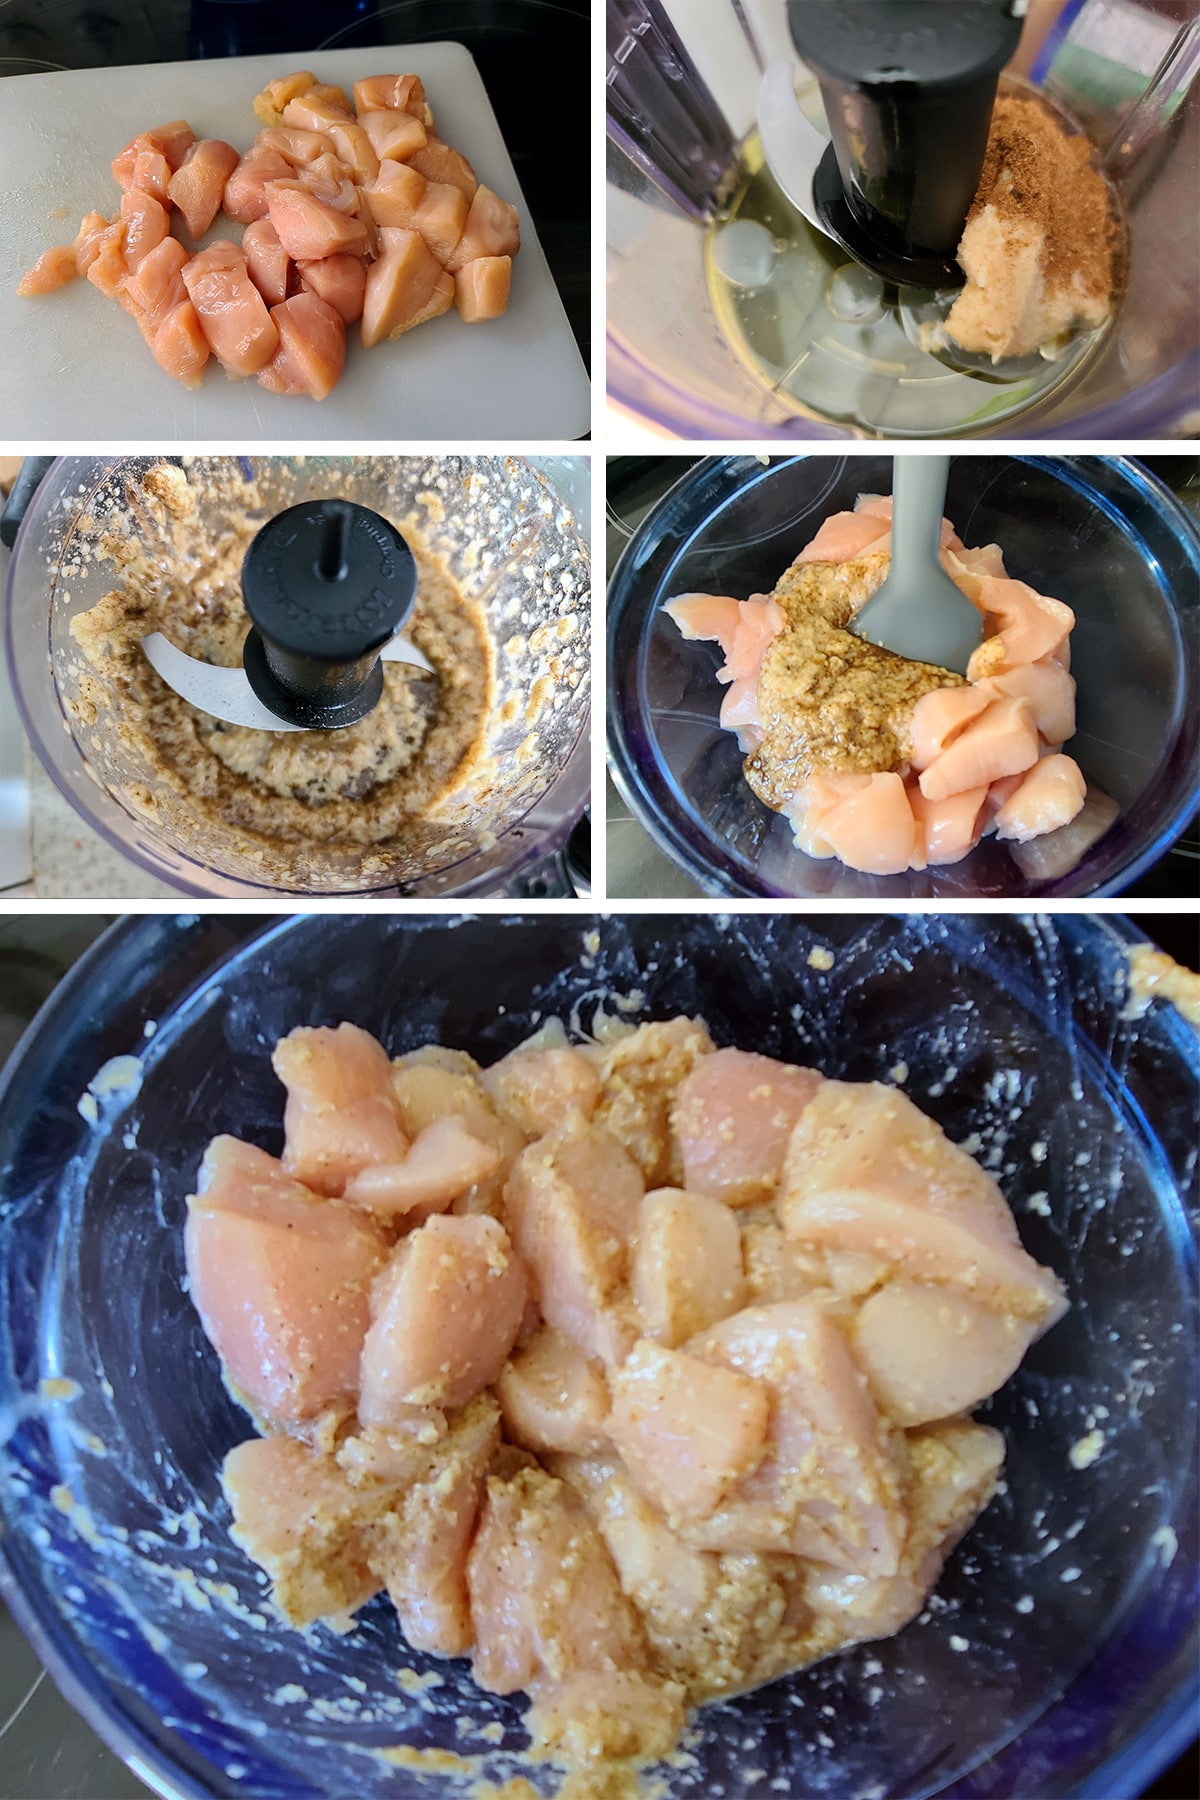 A 5 part image showing the chicken & marinade being prepared and combined.